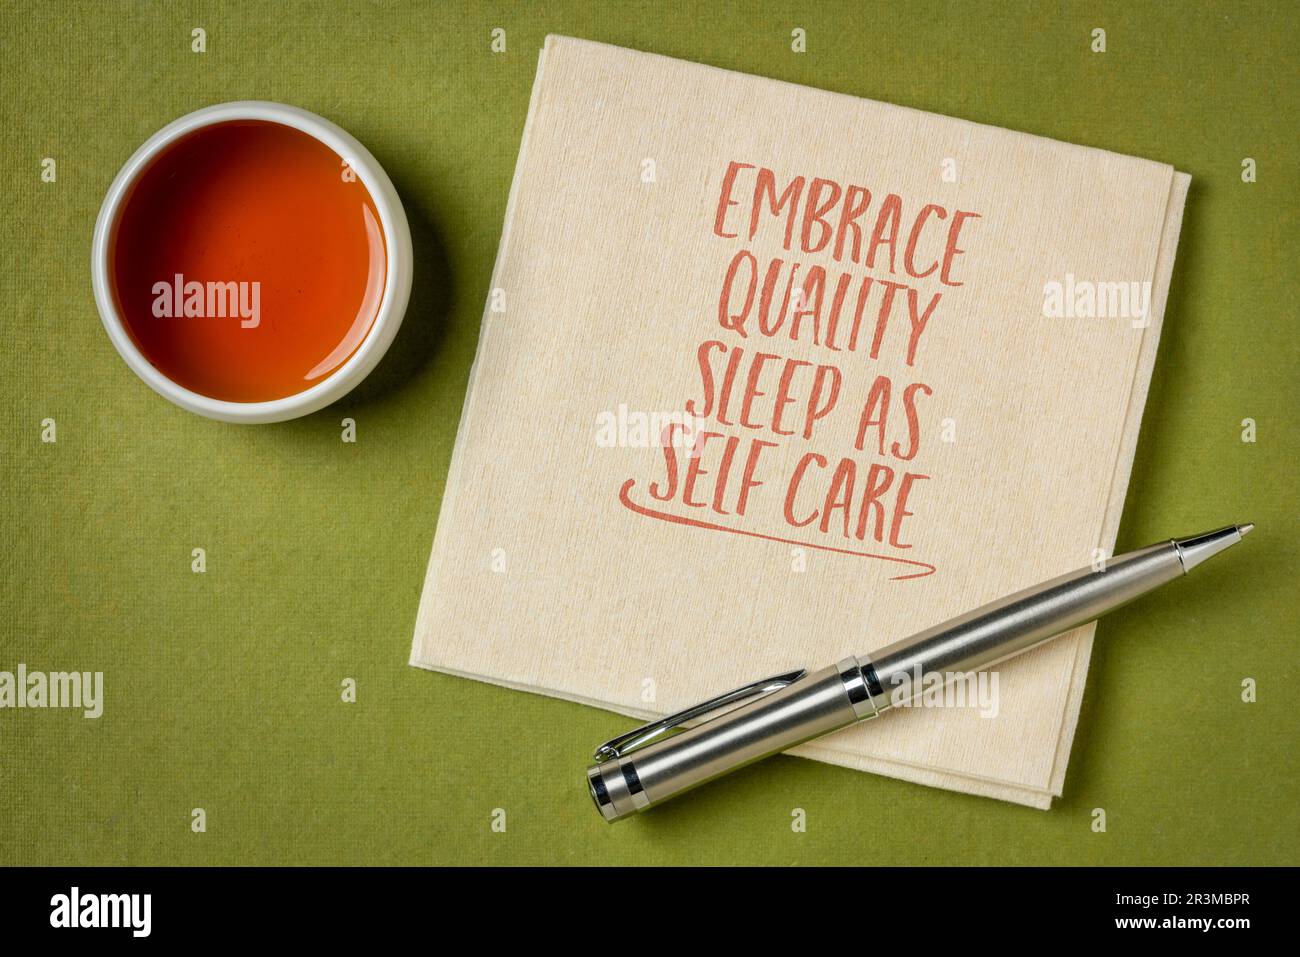 embrace quality sleep as self care - inspirational note on a napkin, healthy lifestyle and personal development concept Stock Photo